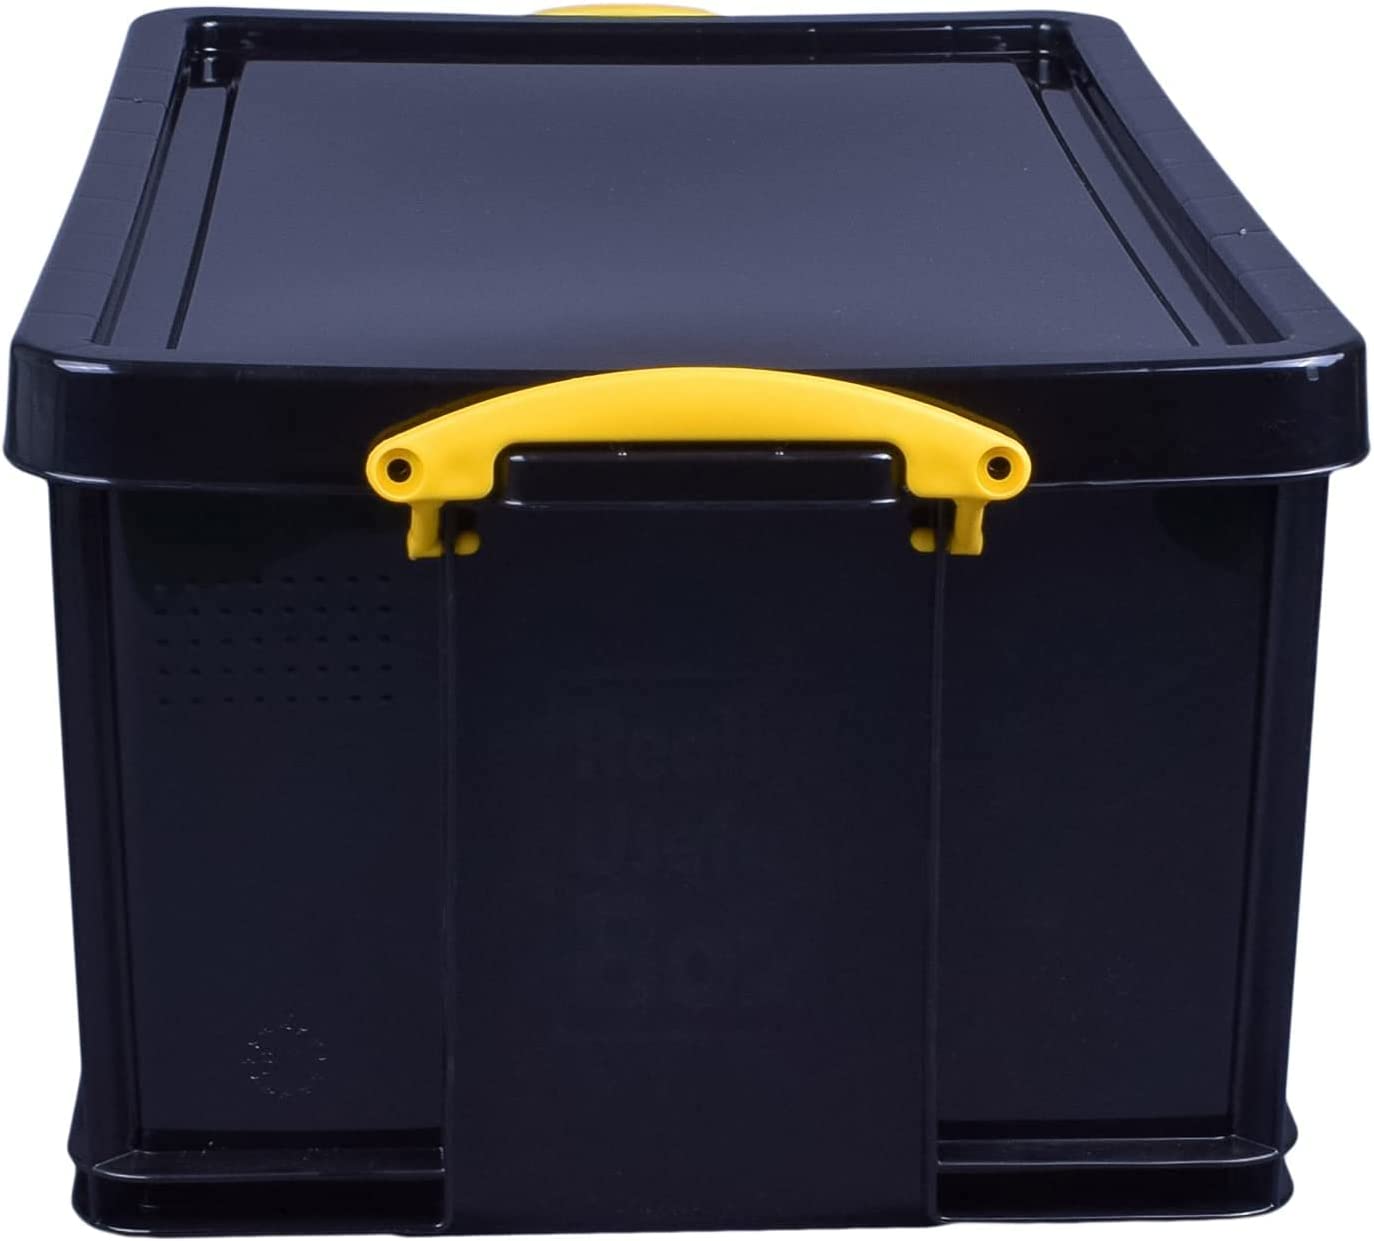 48 Litre Extra Strong Box (Black)